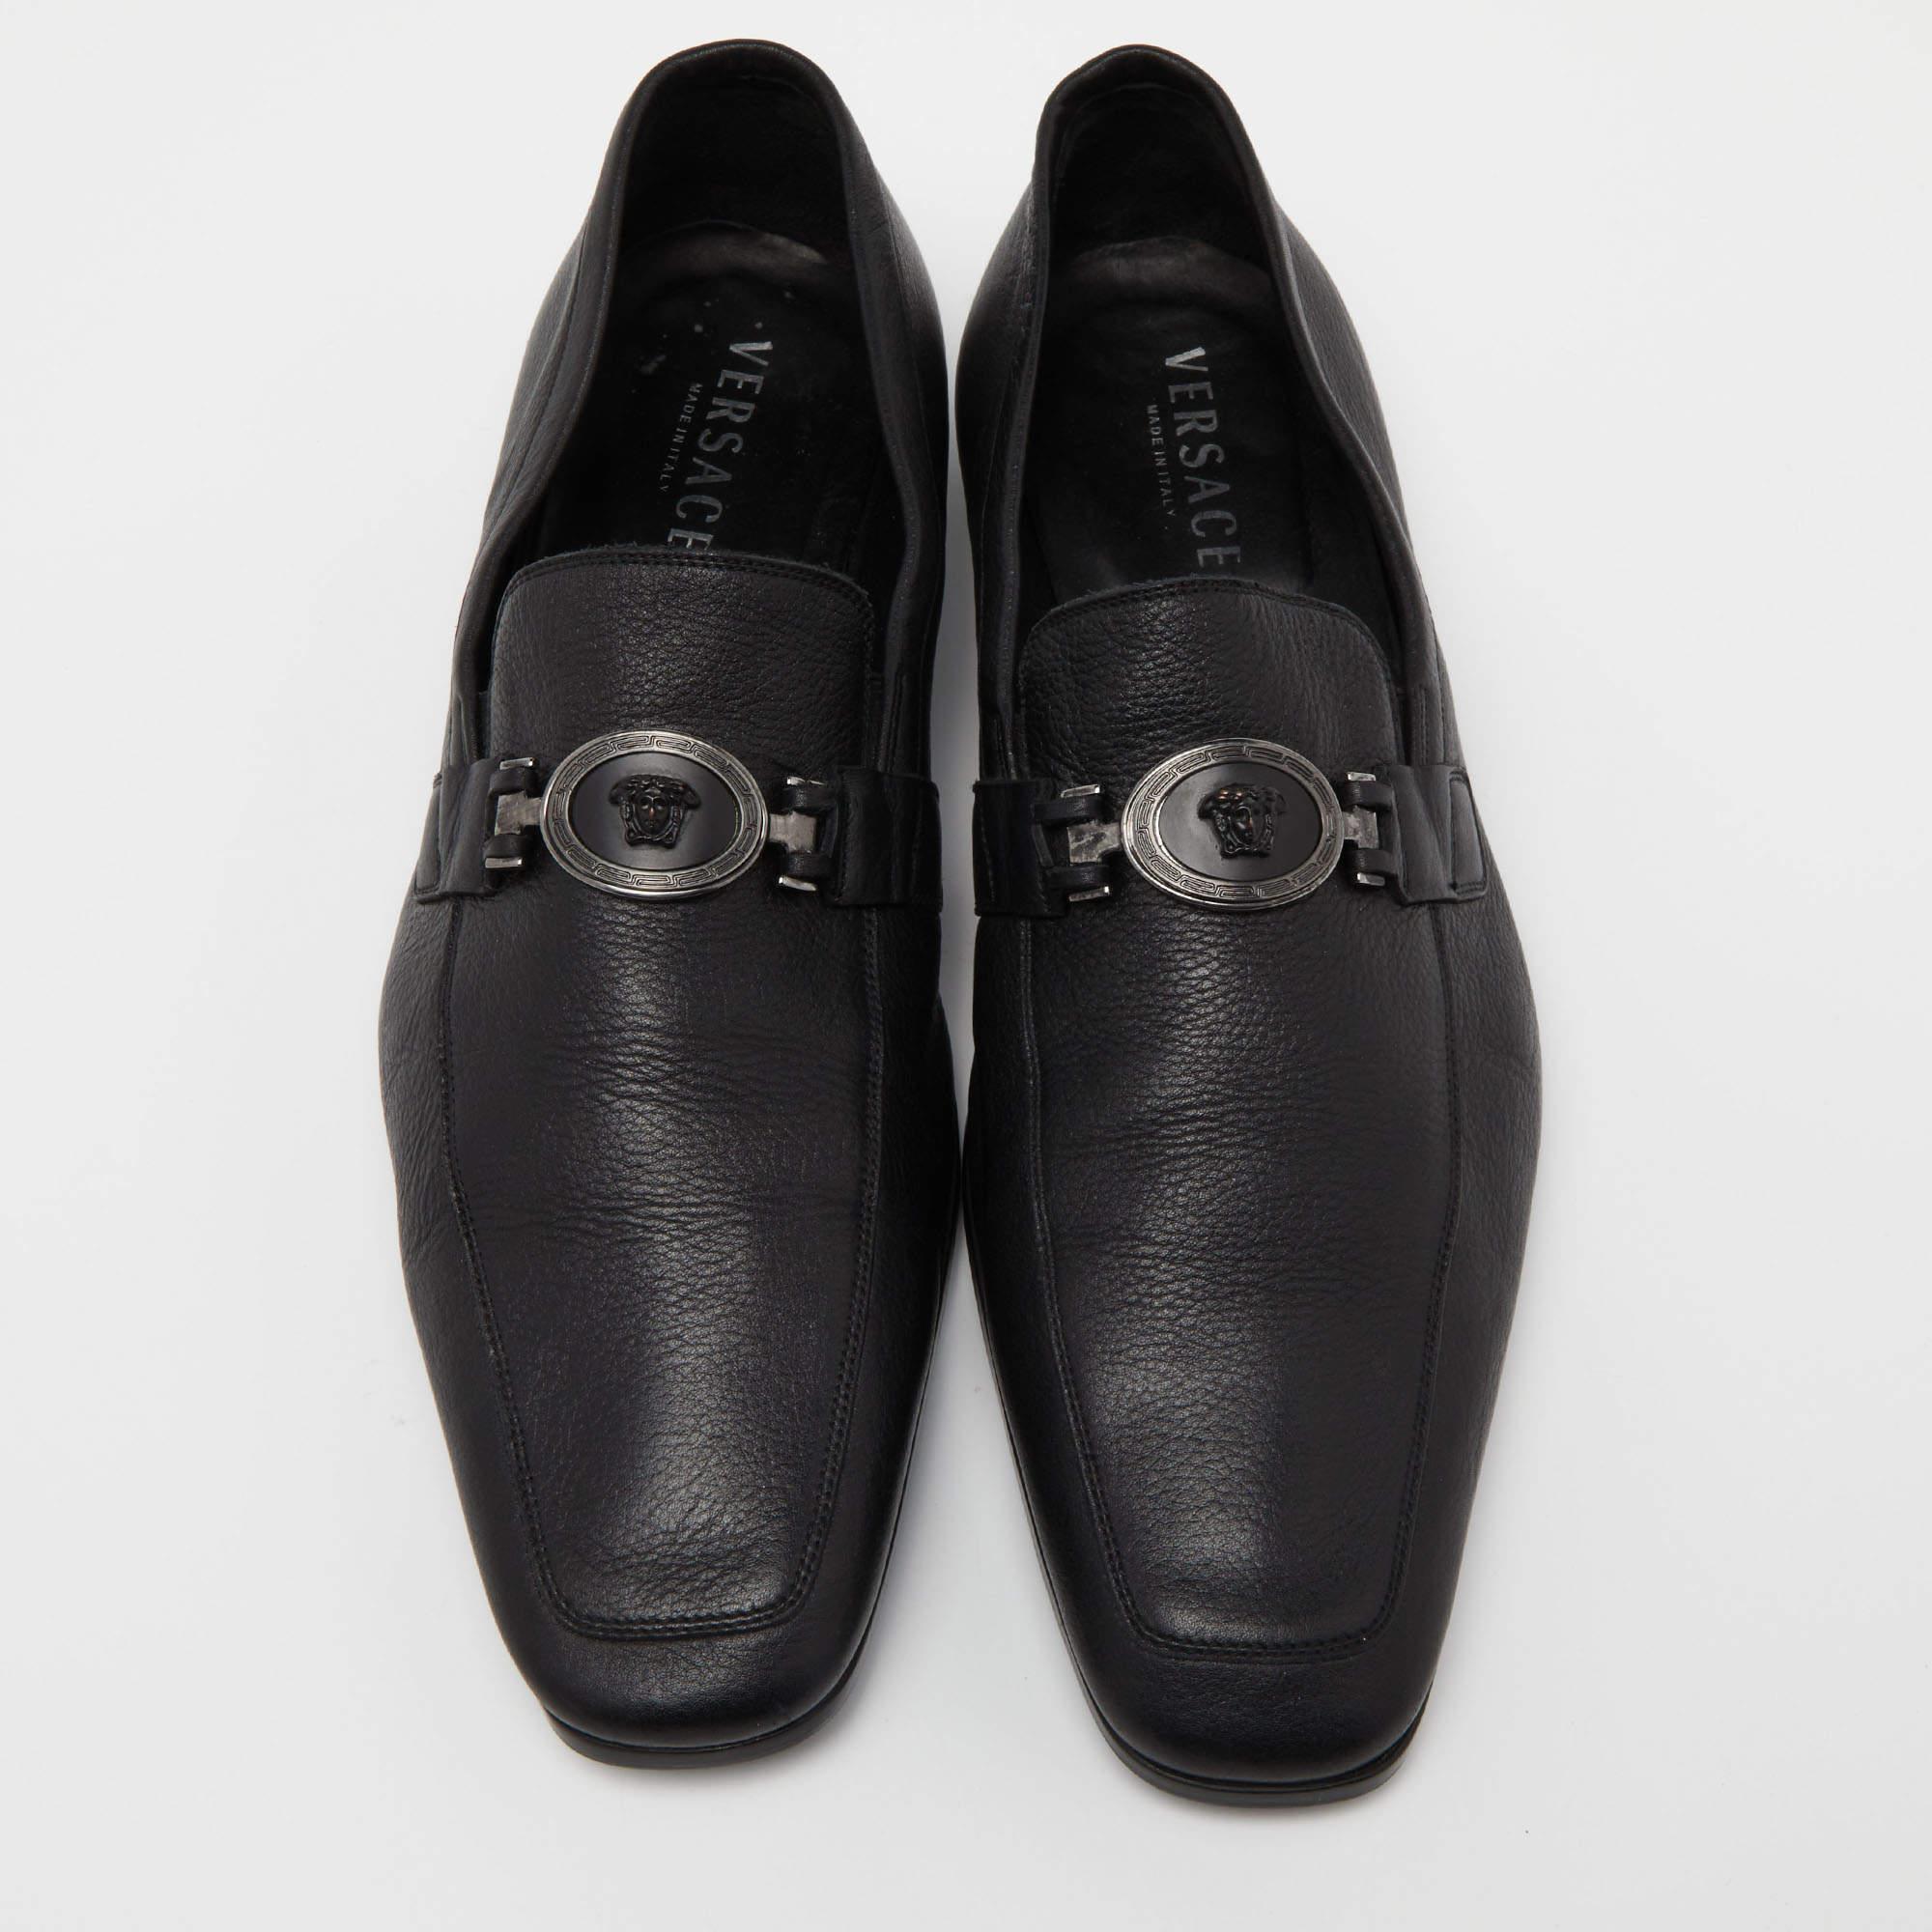 Versace Black Leather Medusa Buckle Slip On Loafers Size 46 In Good Condition For Sale In Dubai, Al Qouz 2